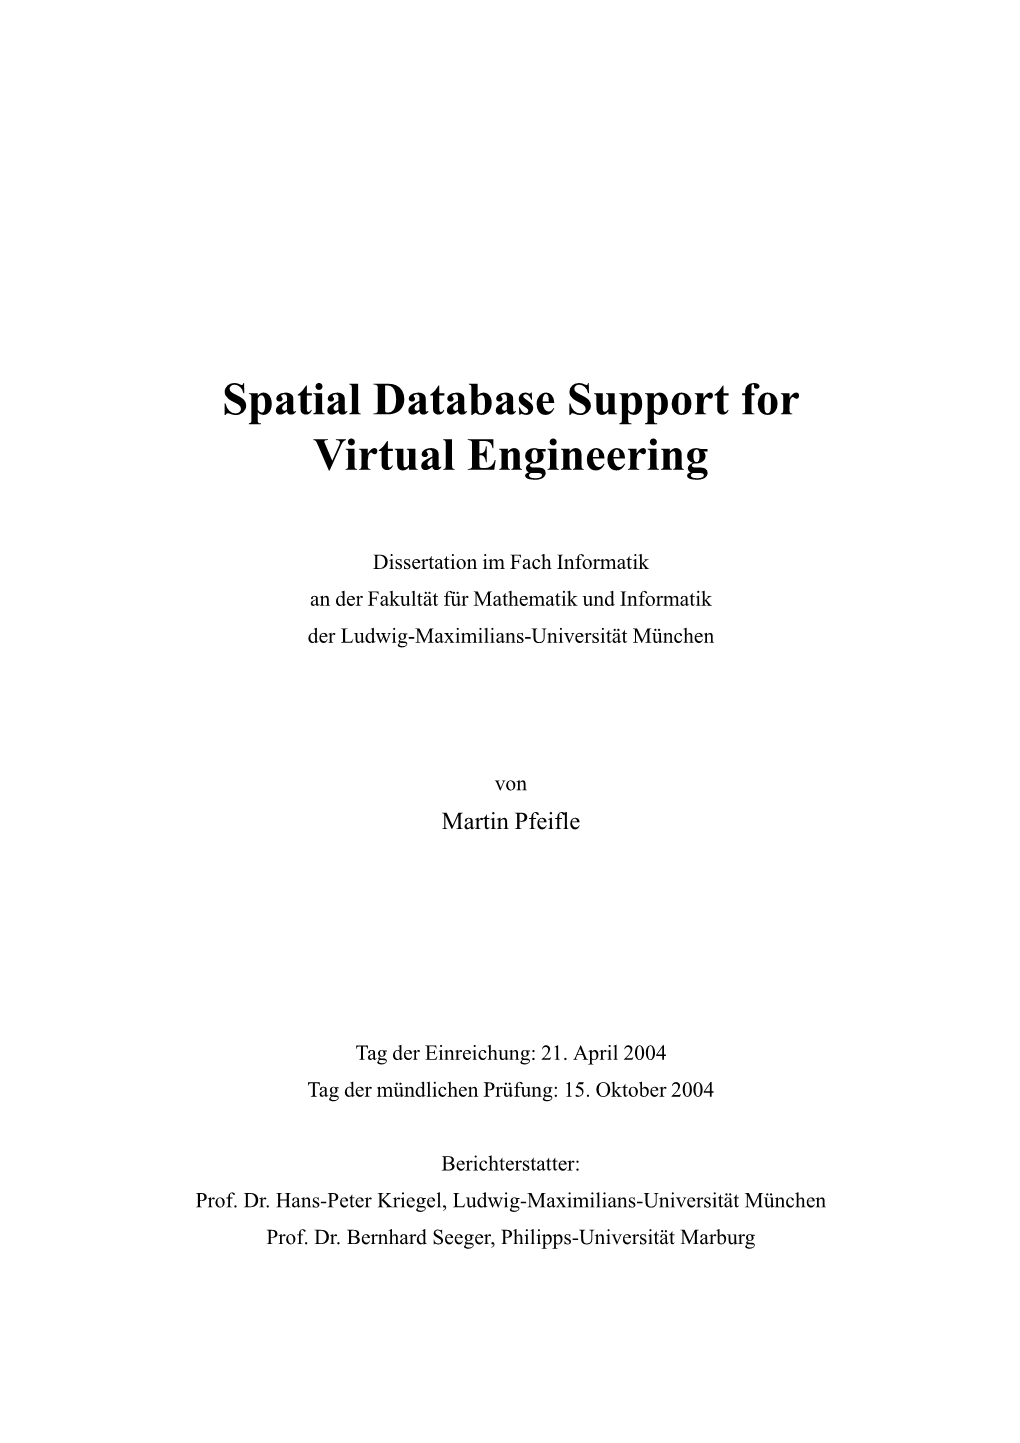 Spatial Database Support for Virtual Engineering